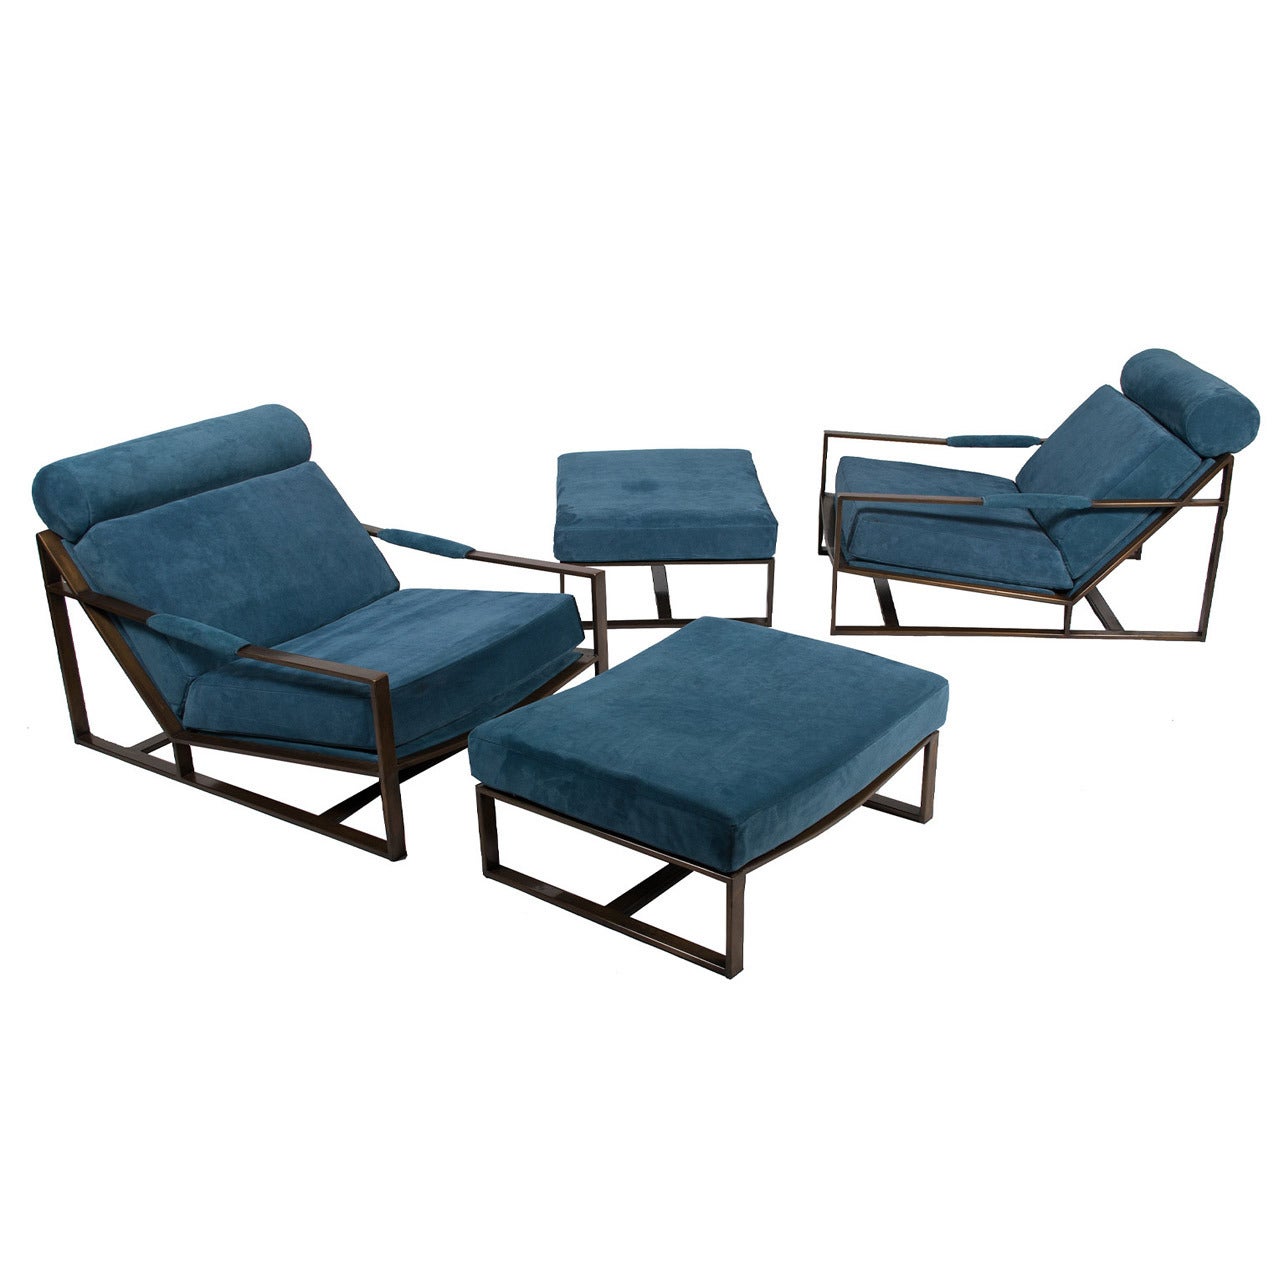 Two Sets of Milo Baughman Low Lounges with Ottomans